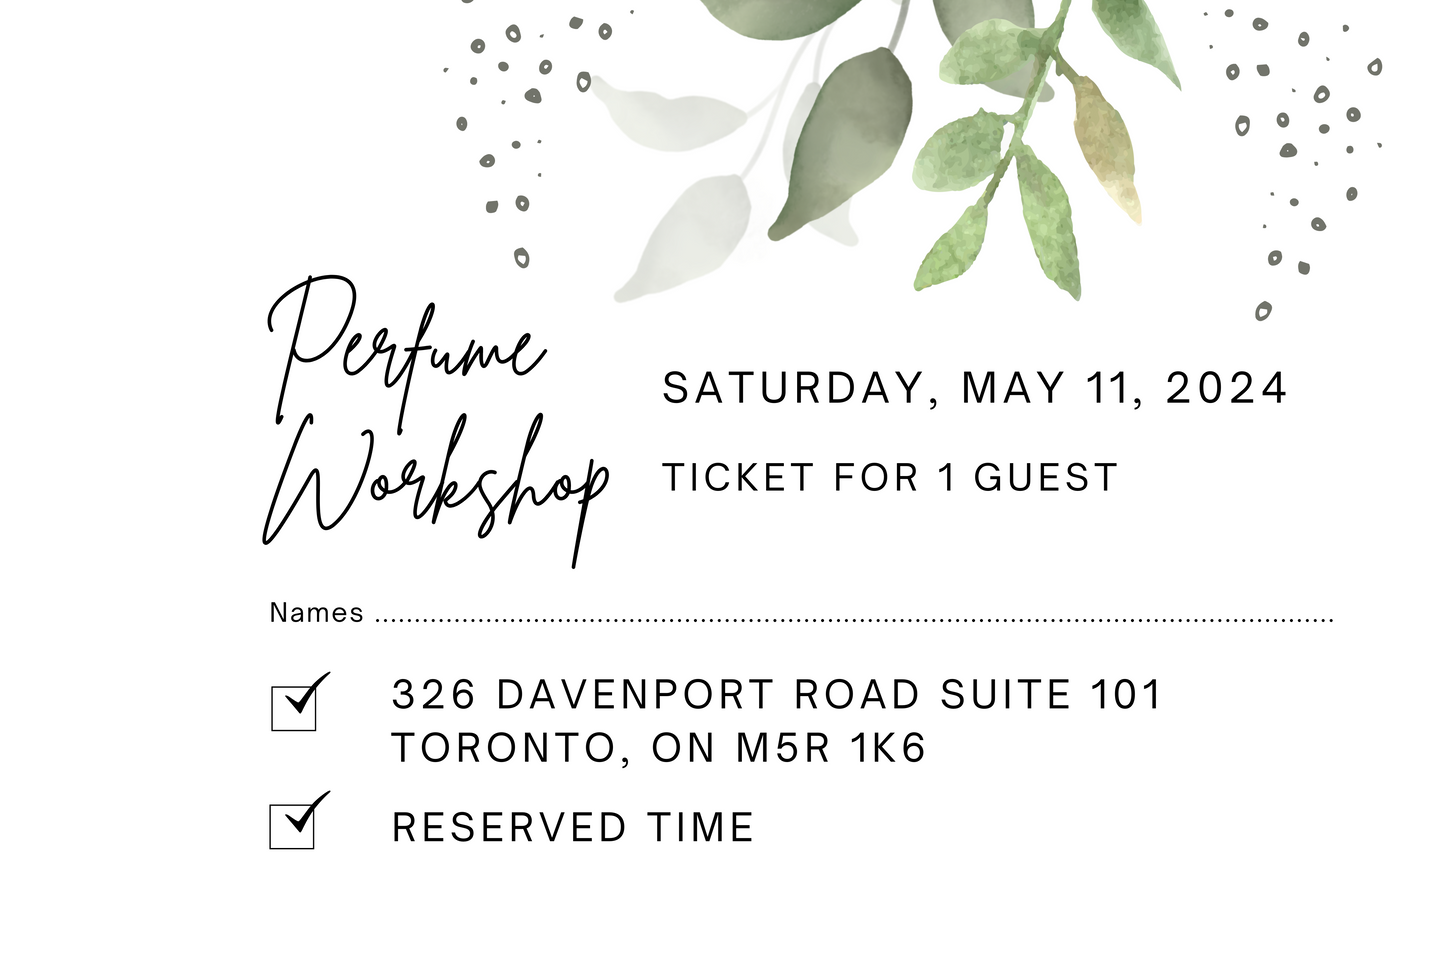 May 11th, 2024 Perfume/Cologne Workshop Session For 1 Guest